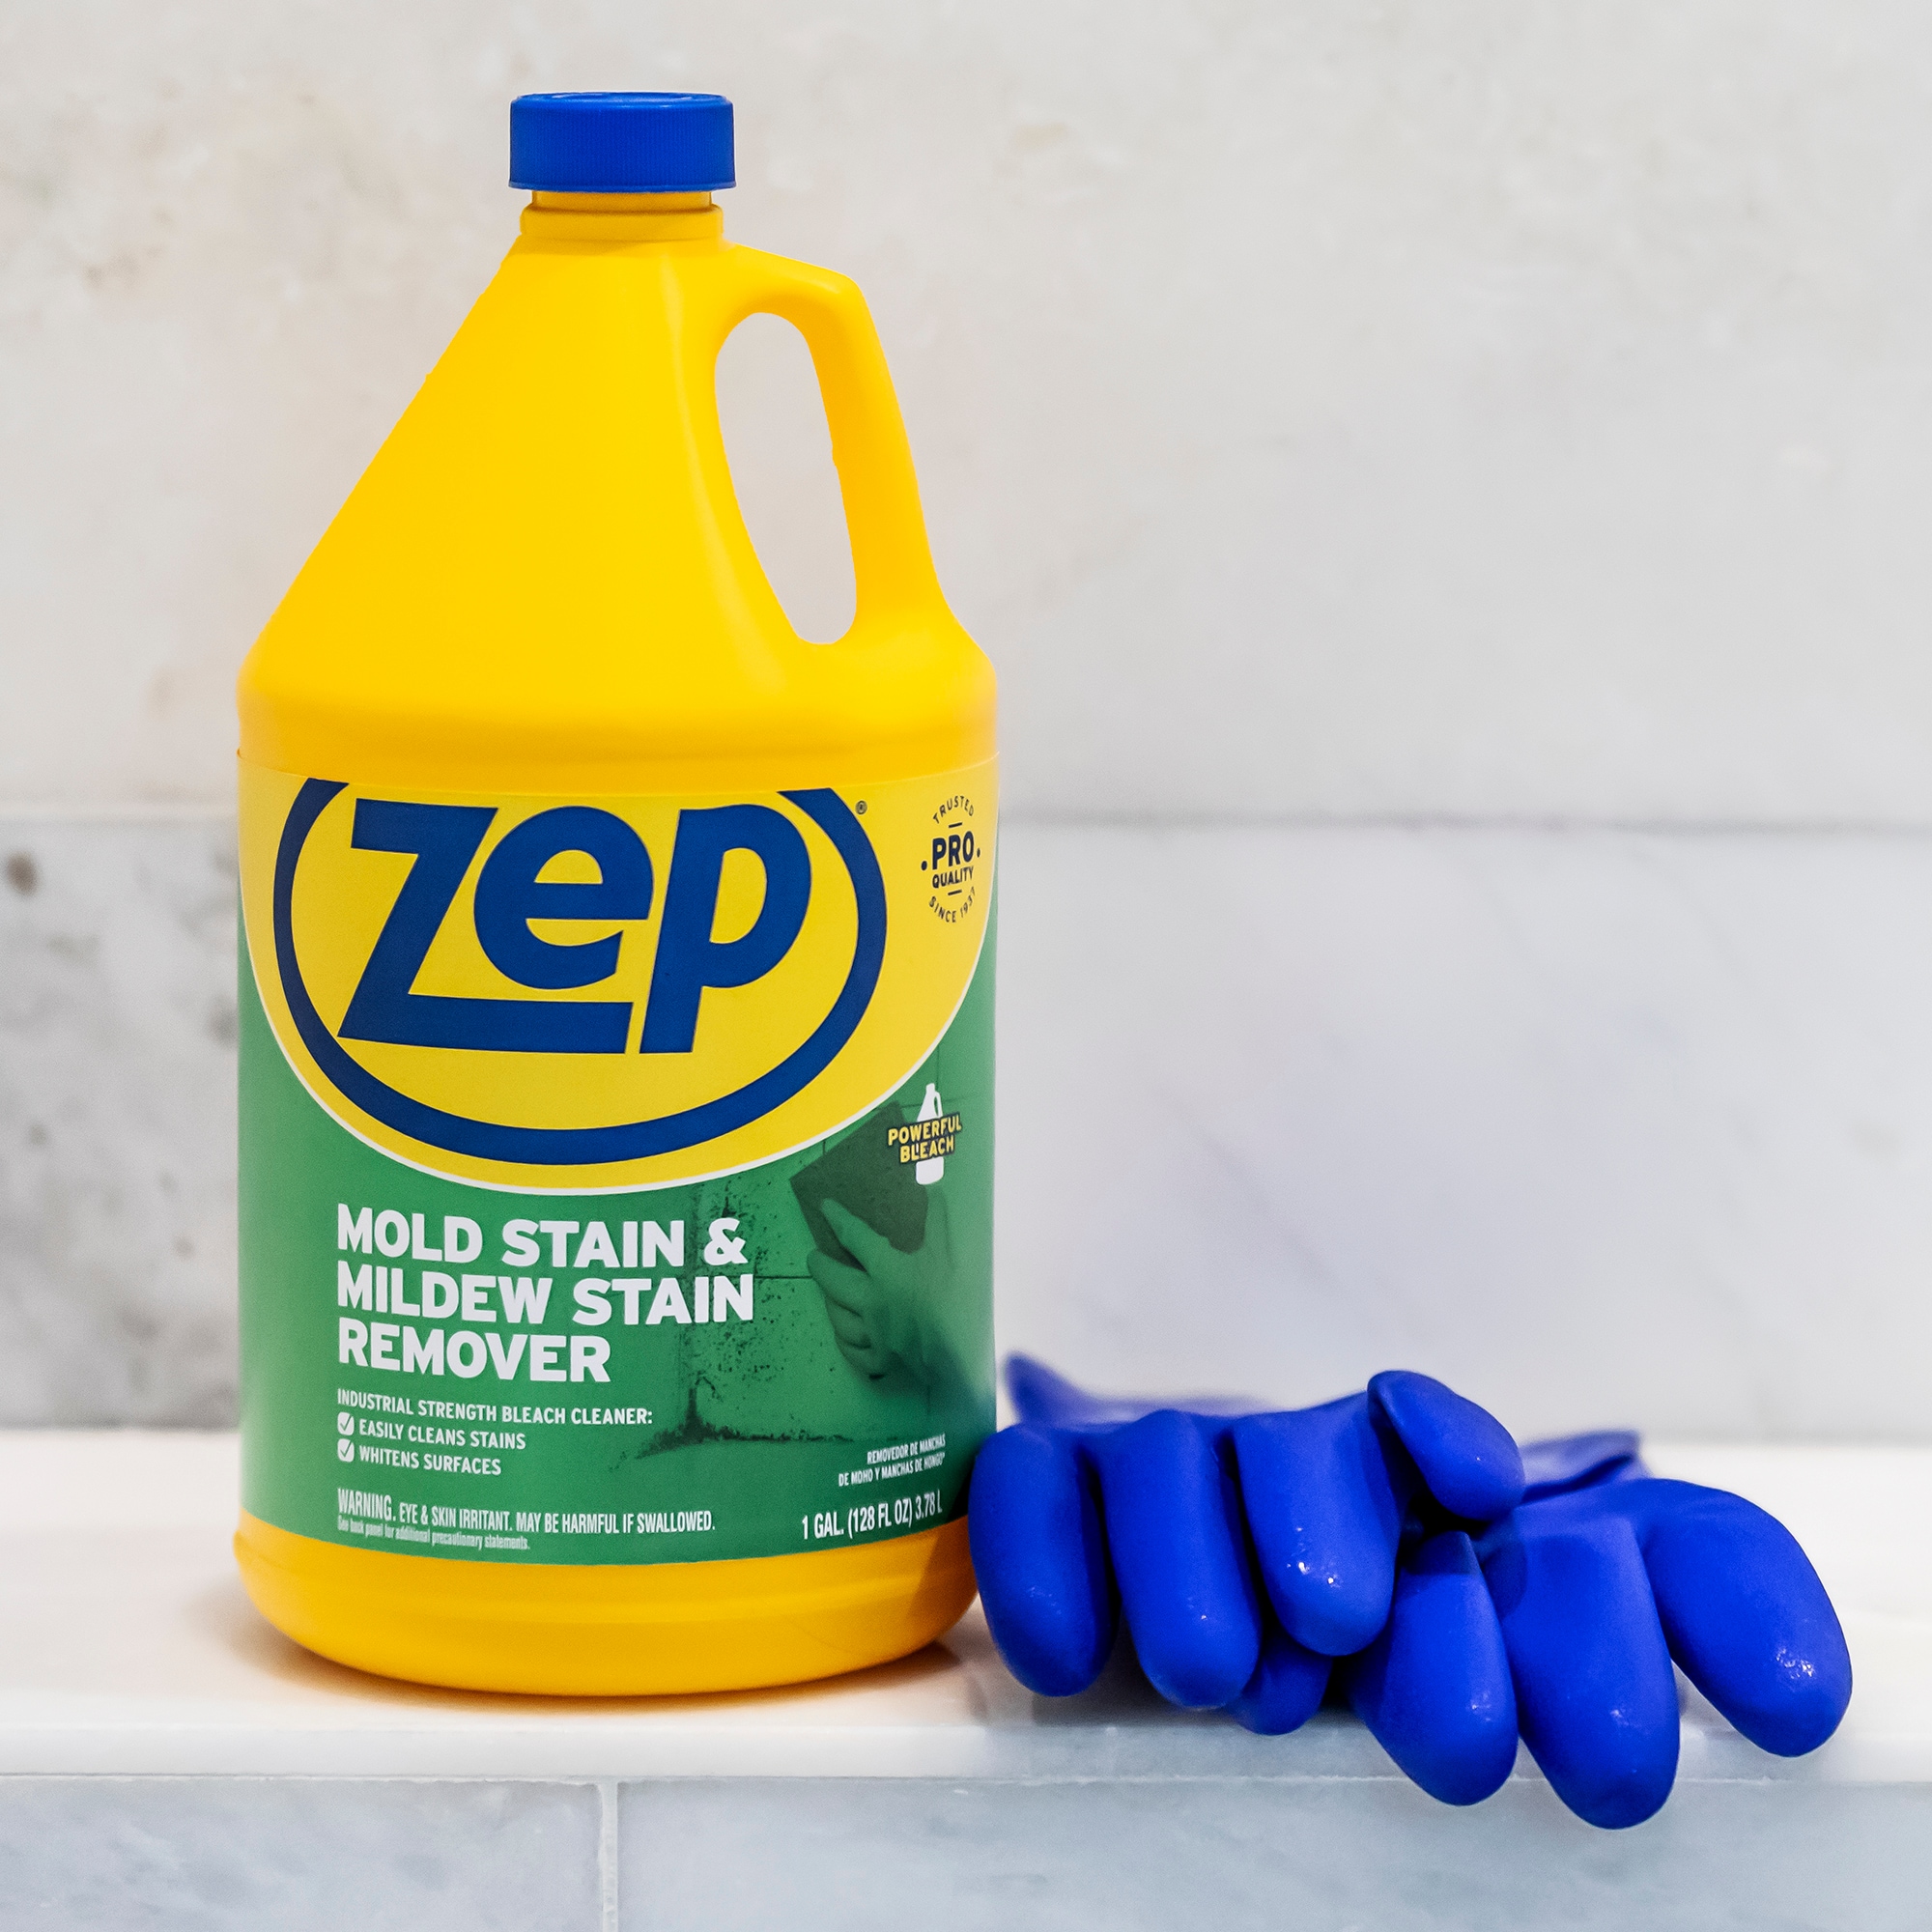 Zep Premium Carpet Shampoo 2.5 Gallon (Case of 2) Professional Strength Formula for Deep Cleaning and Stain Removal